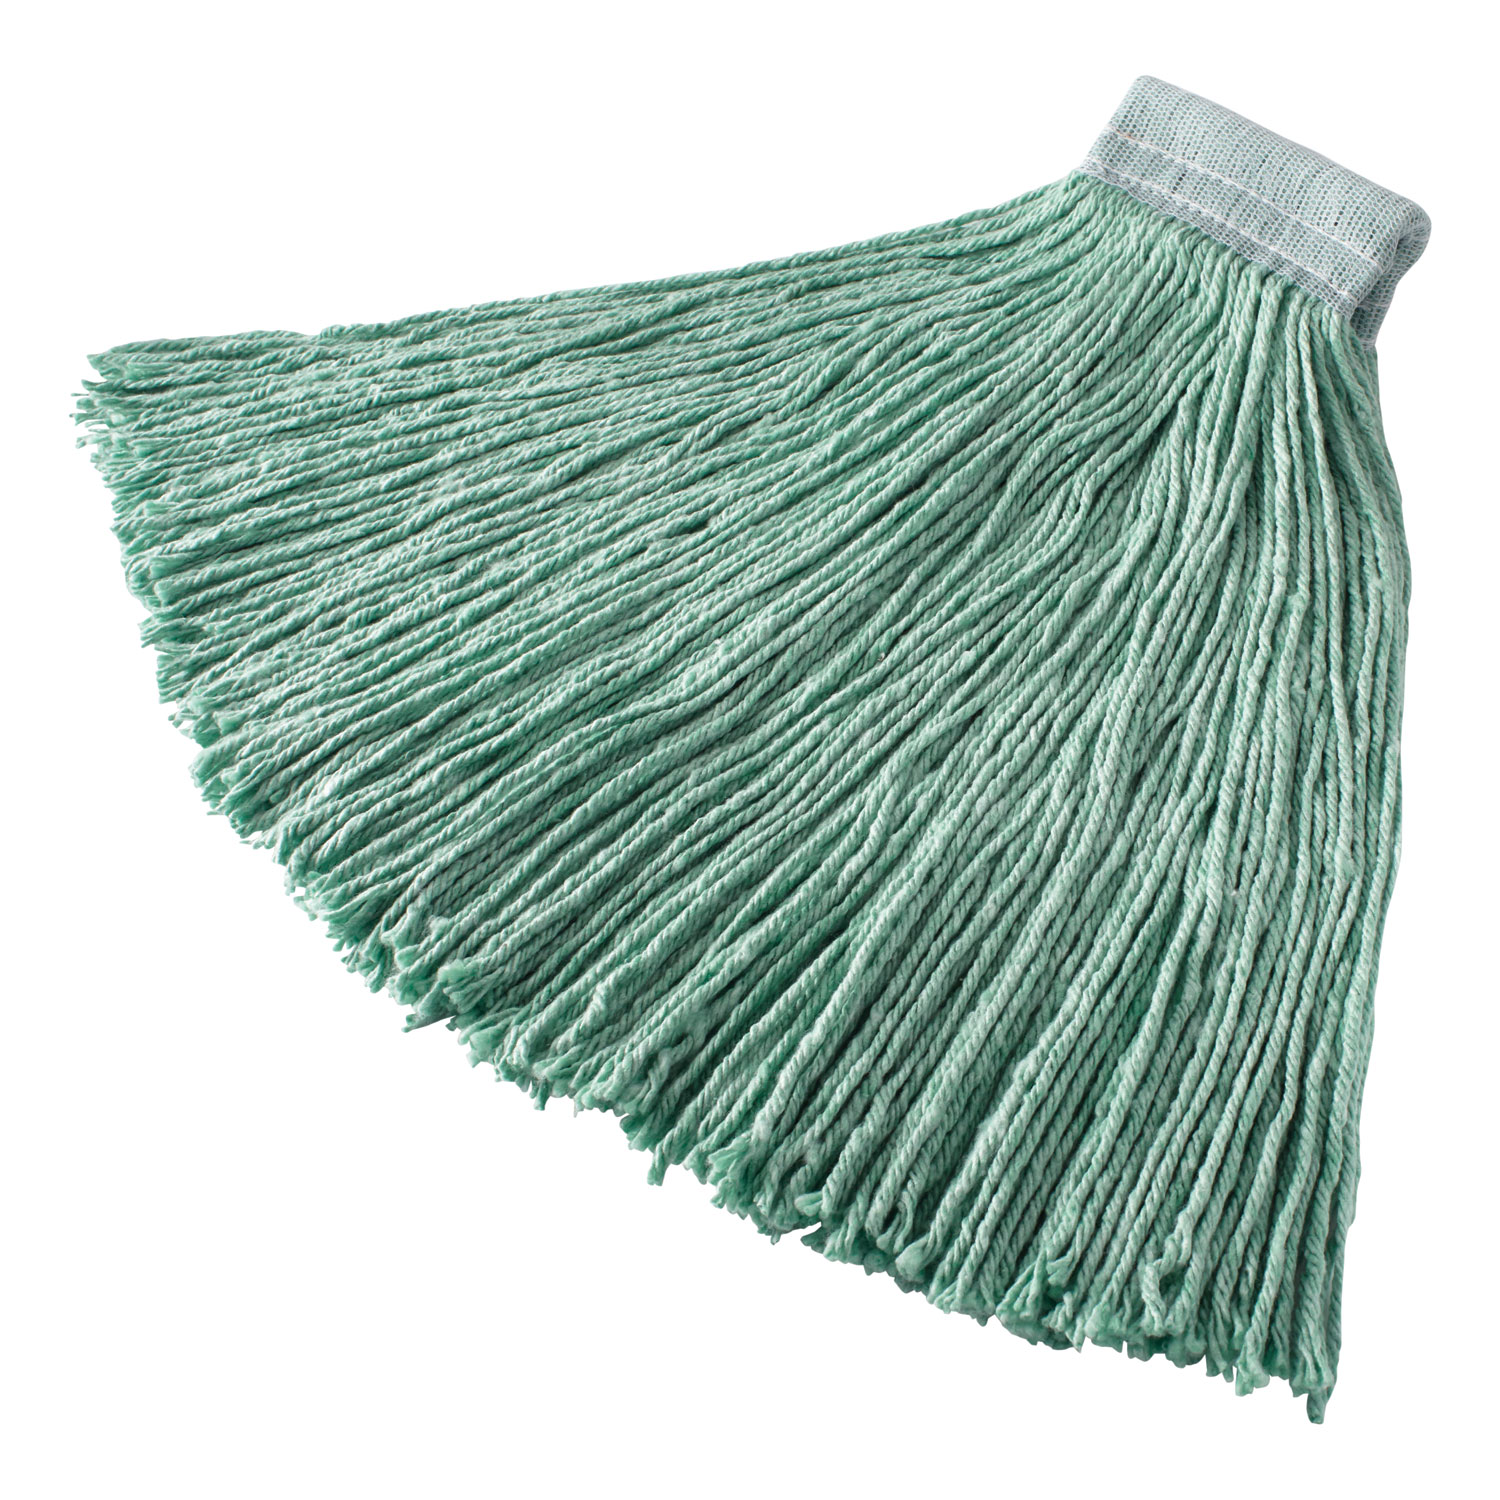 Rubbermaid® Commercial Non-Launderable Cotton/Synthetic Cut-End Wet Mop Heads, 24 oz, Green, 5 White Headband